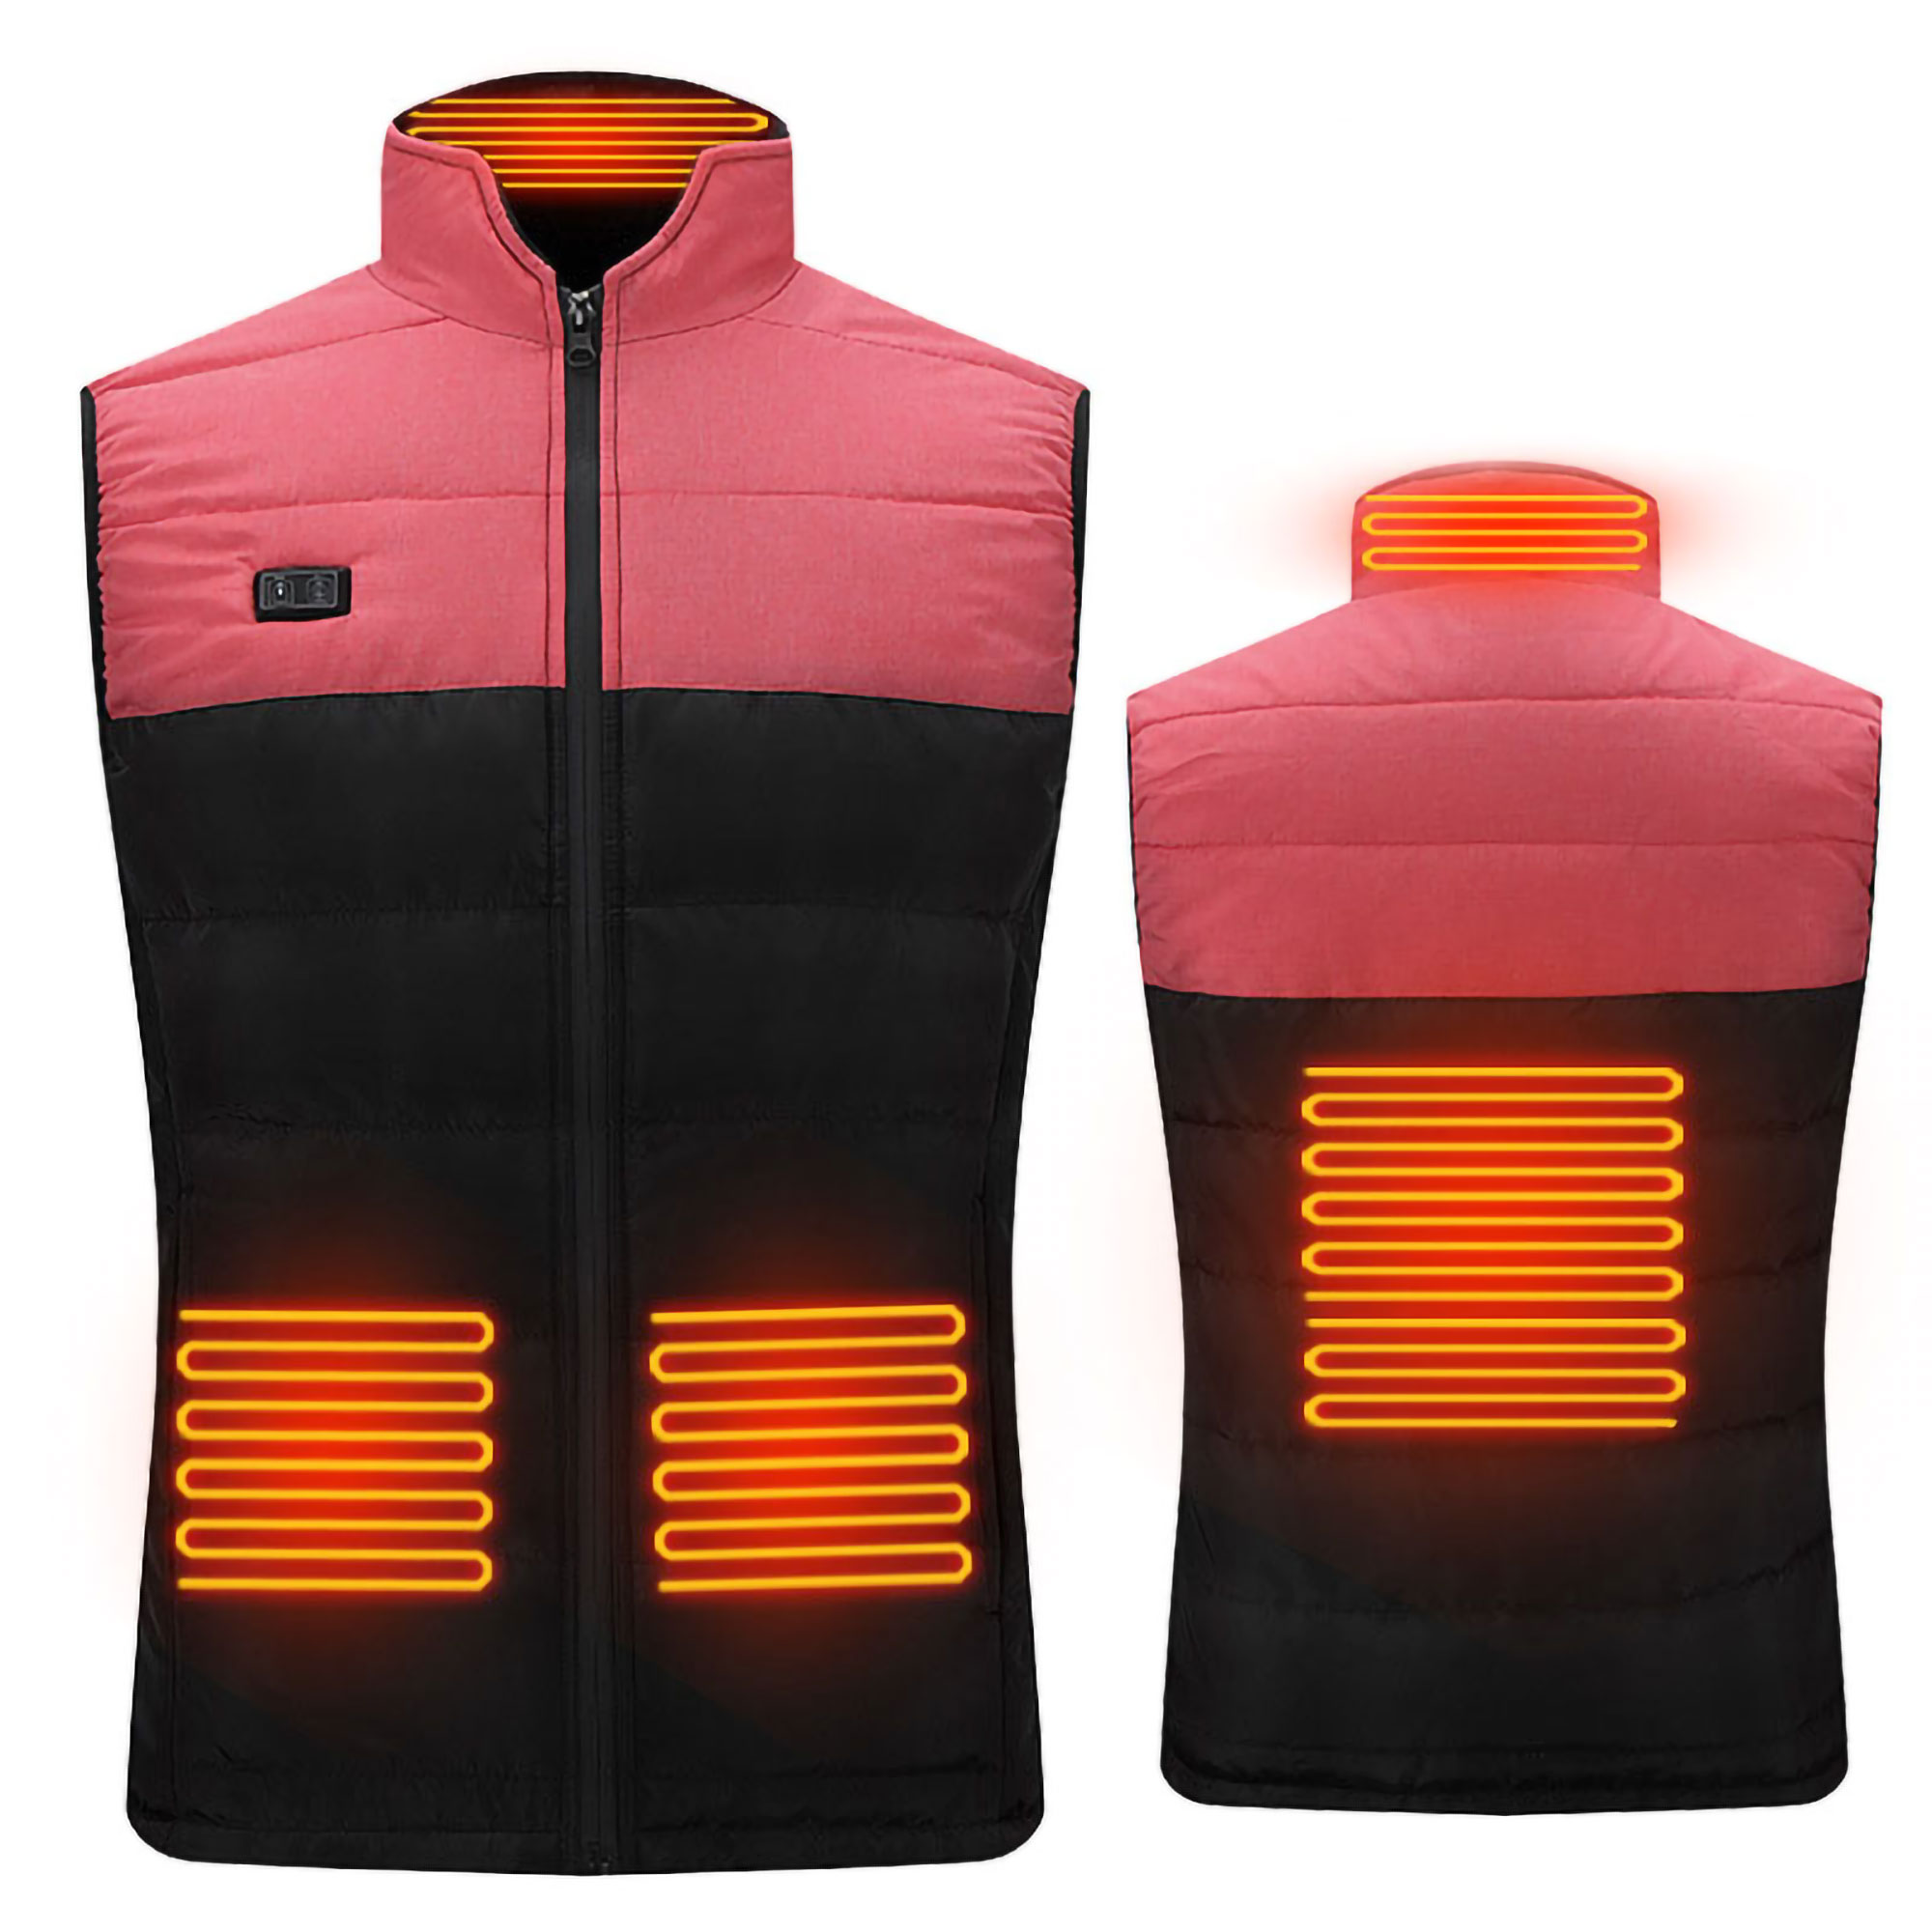 Sexy Dance Electric Thermal Heated Vest for Men Women Sleeveless Zipper Heating Jacket Lightweight Warmth Outwear With Battery Pack - image 1 of 3